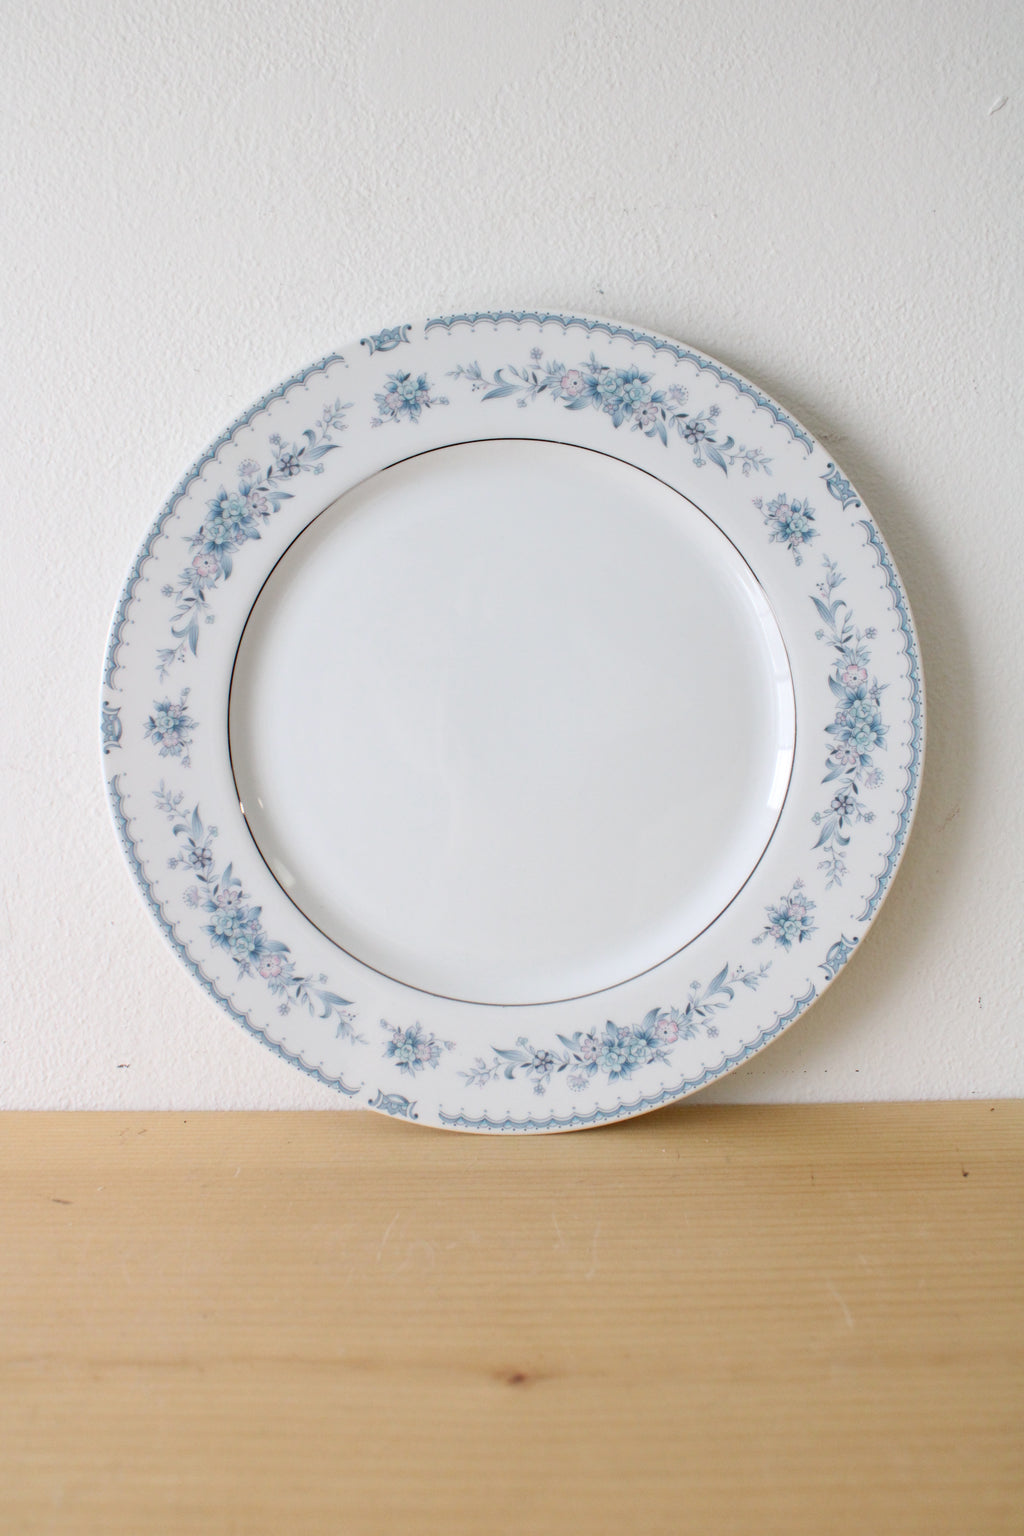 Fine China Society Harmony 5217 White Blue Pink Floral Dinner Plate